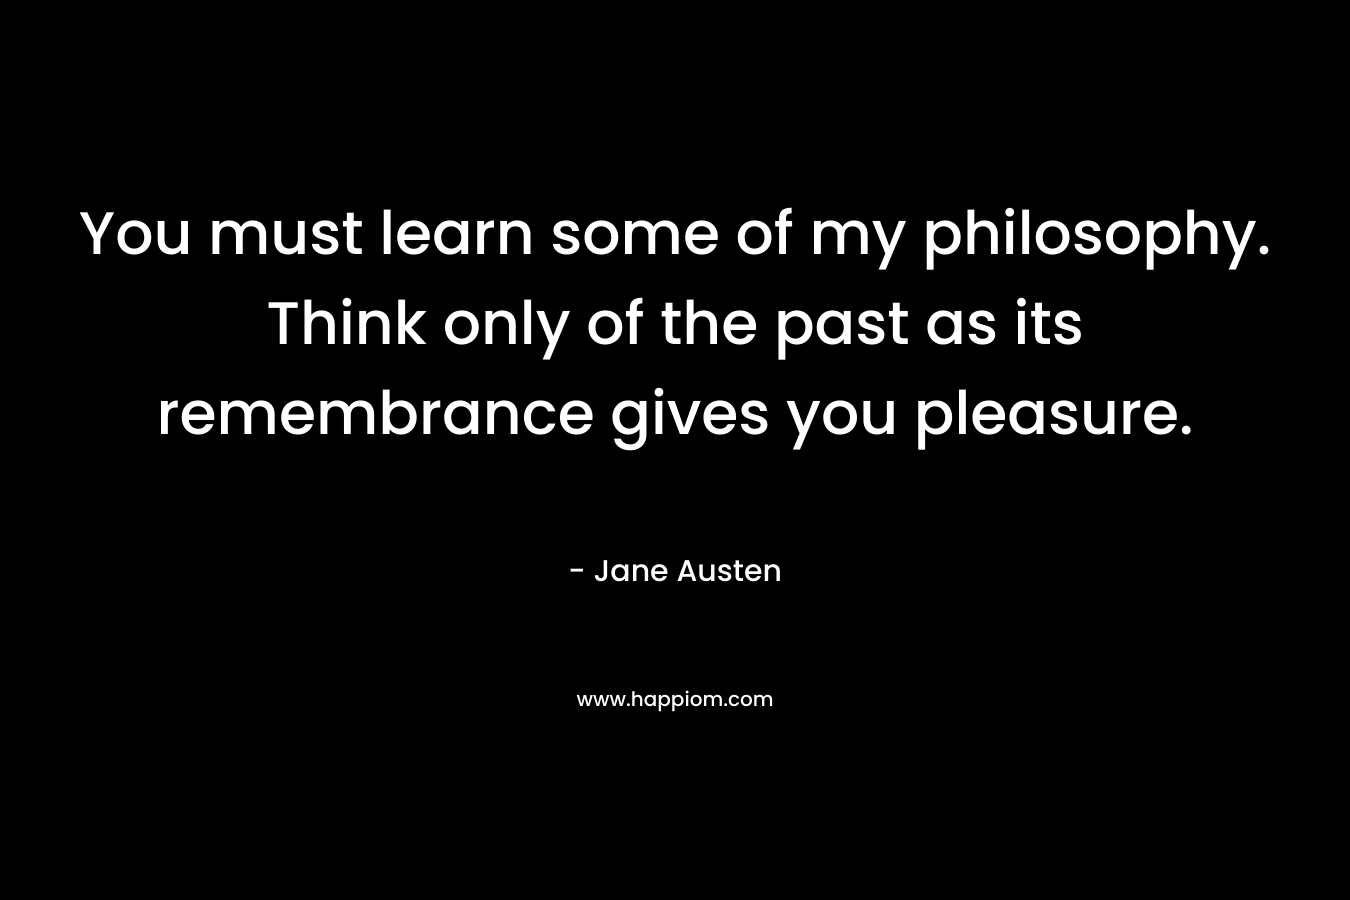 You must learn some of my philosophy. Think only of the past as its remembrance gives you pleasure.